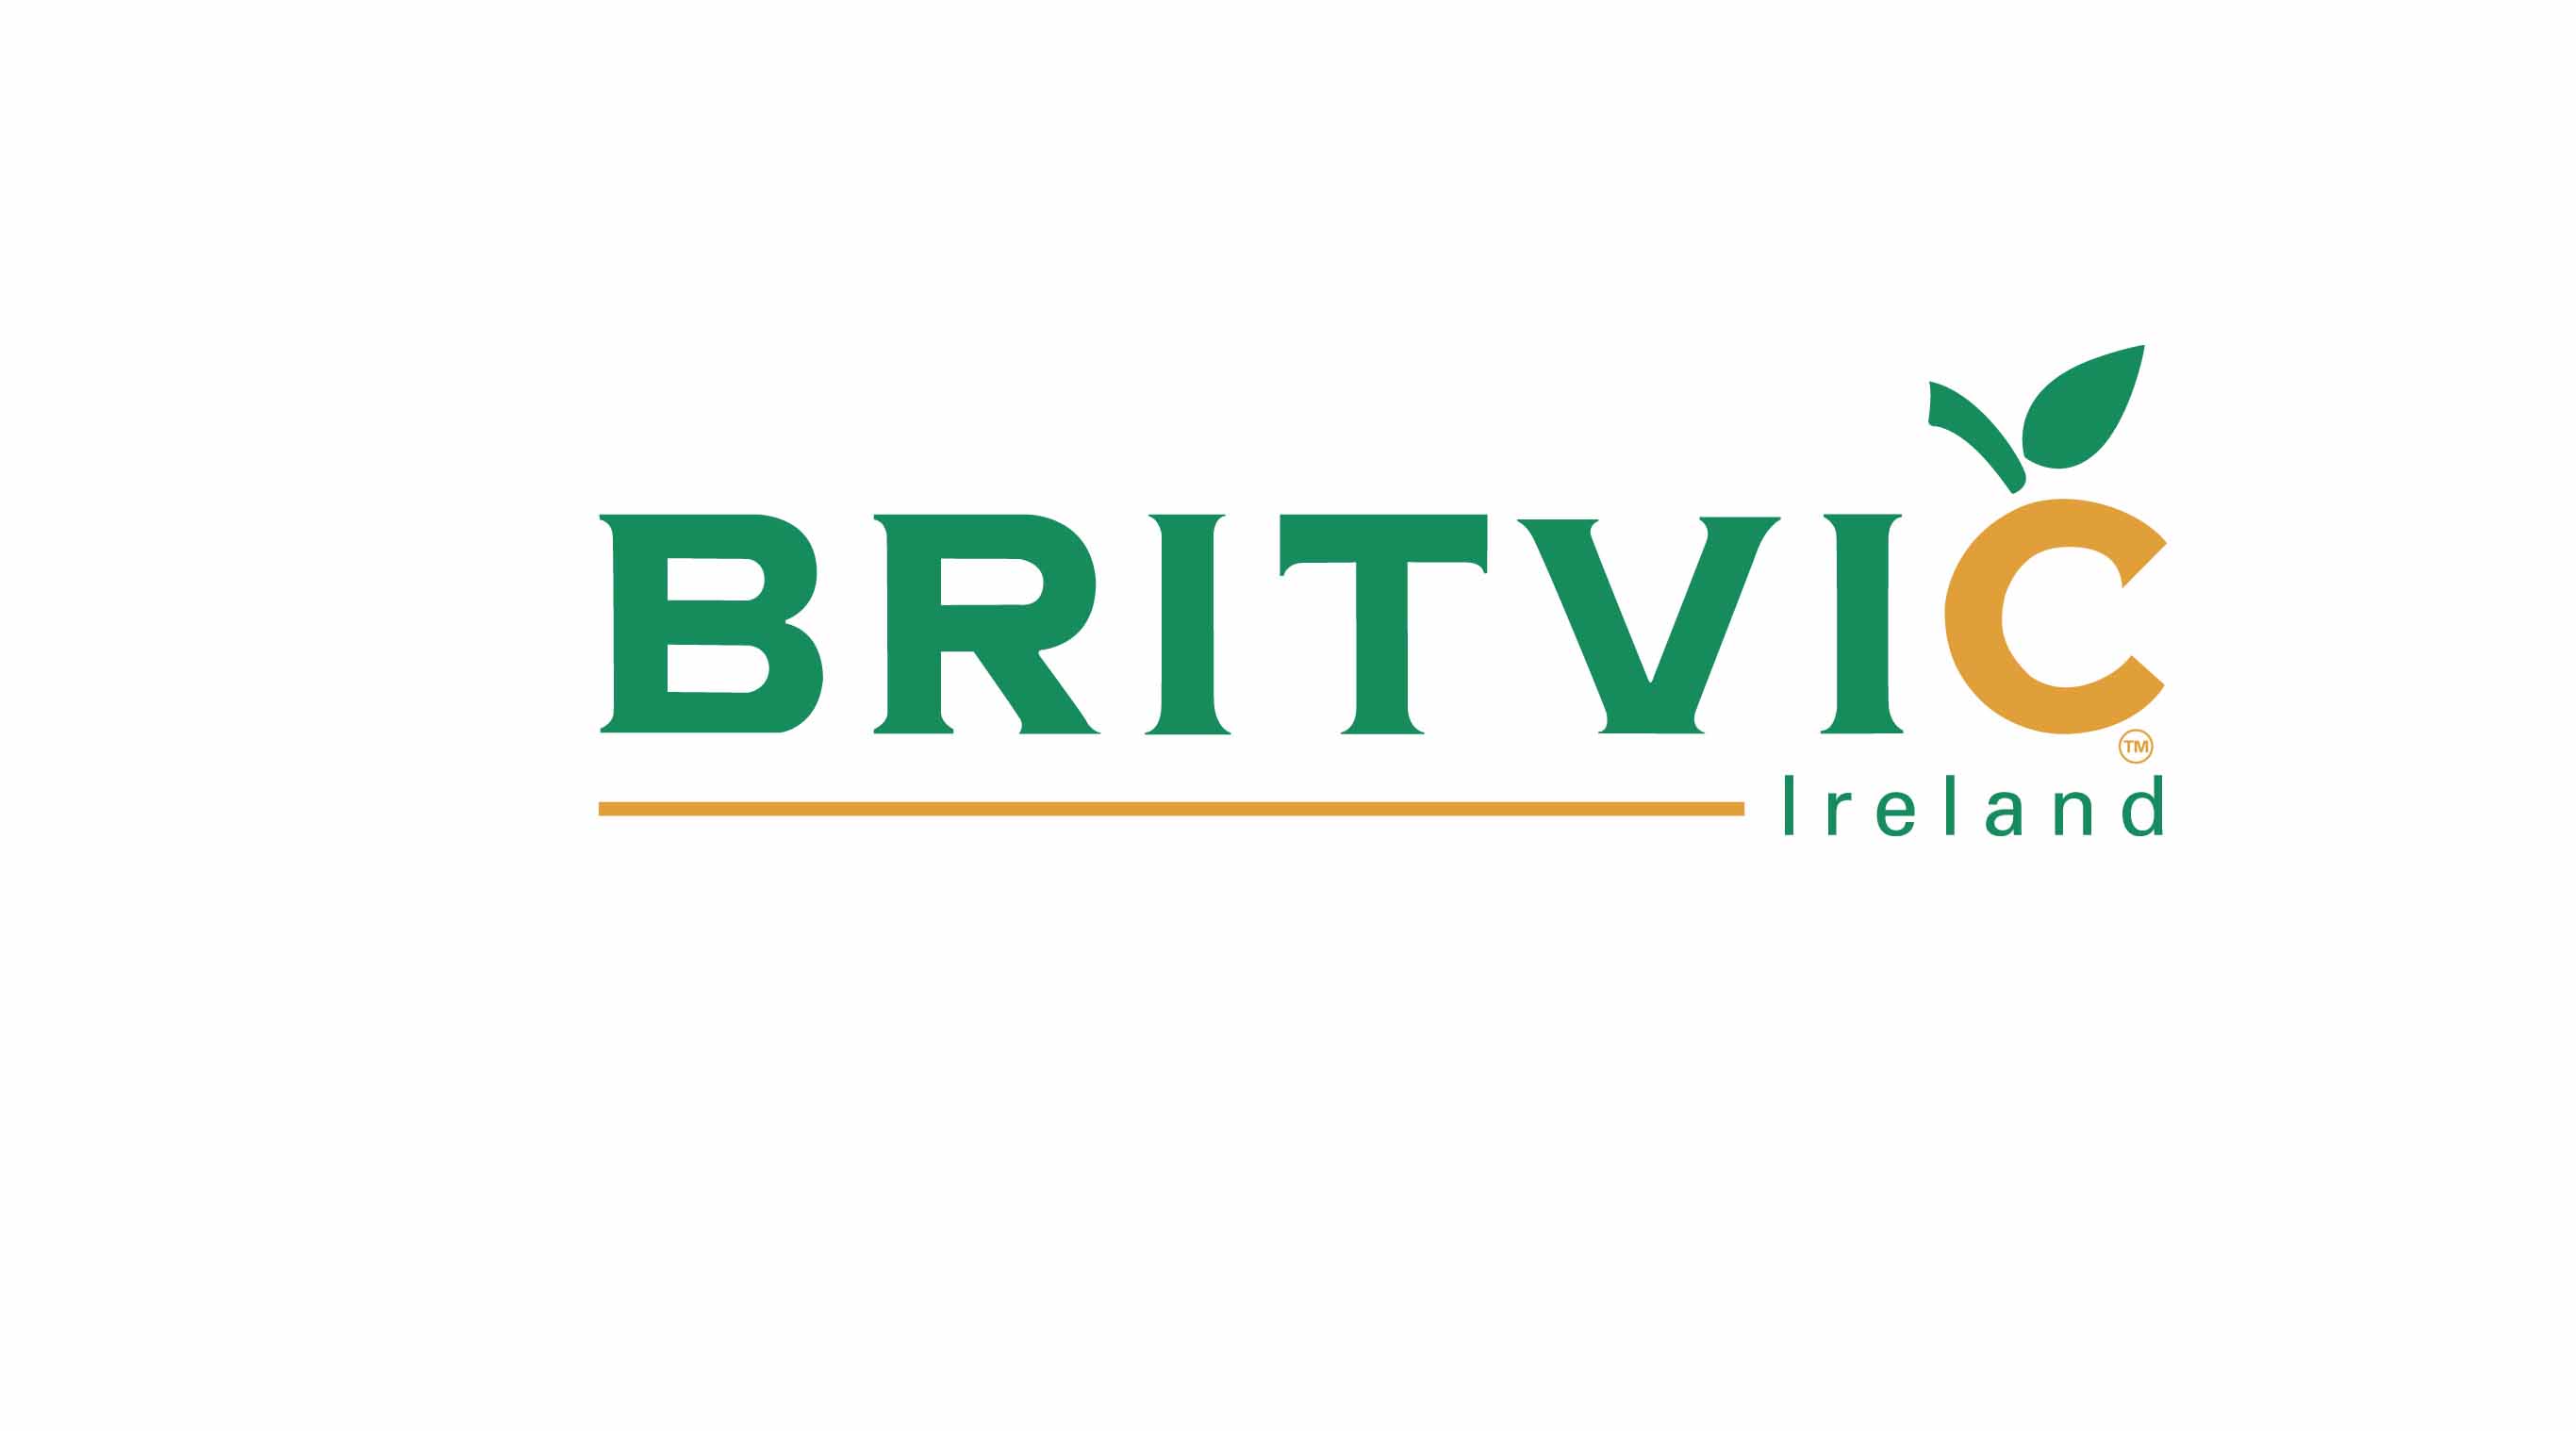 Britvic Ireland's revenues increased by nearly 19% according to Britvic plc's preliminary results for the year ending the 30th of September 2022.